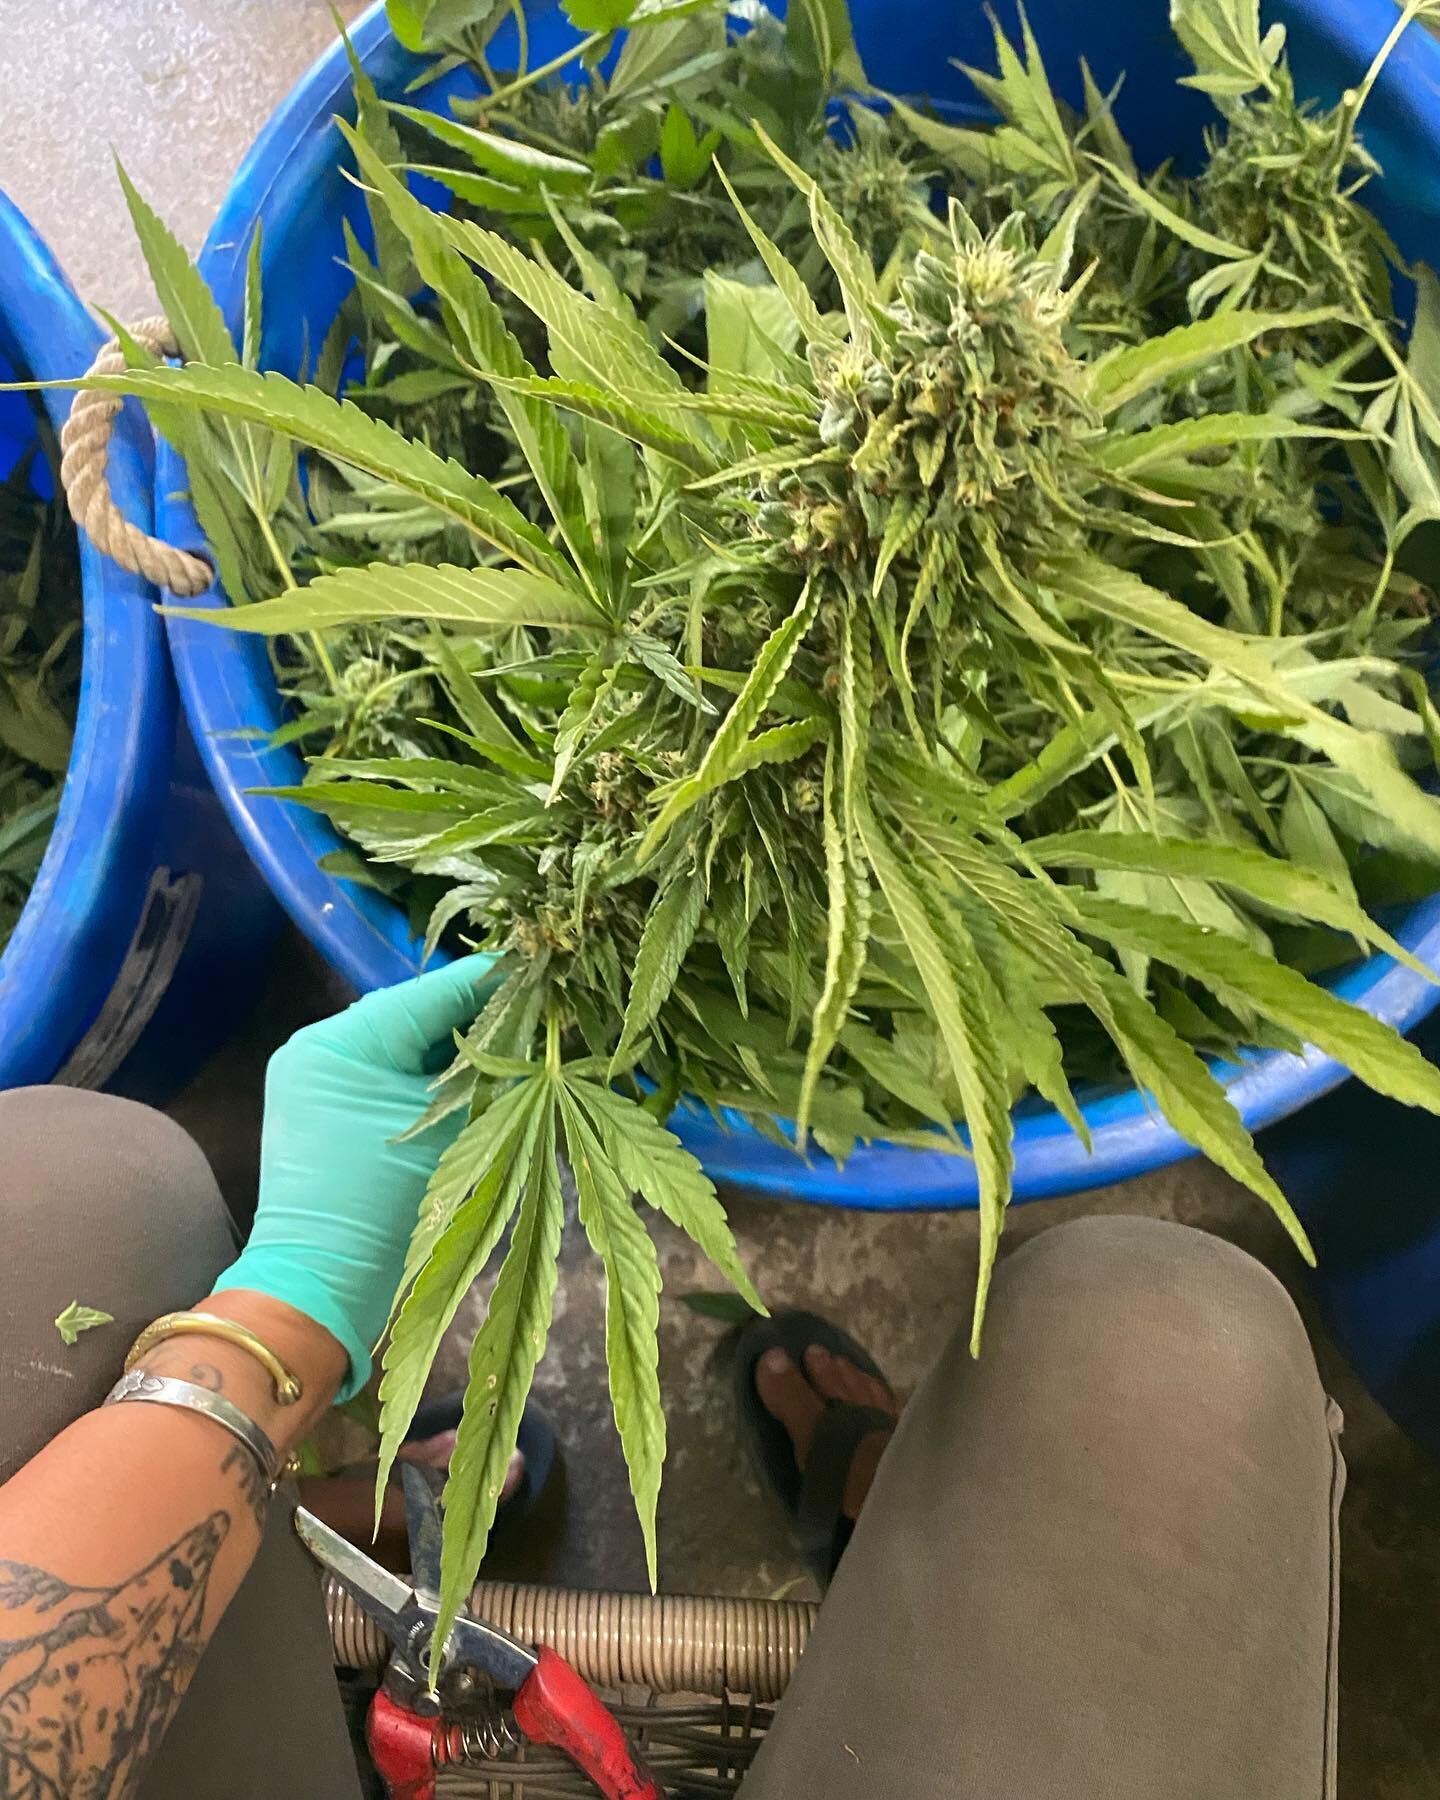 Our light Depp has been coming down in stages every couple days we&rsquo;ve been harvesting one flavor after the next. Today we are working on the lemon fire OG! This is one of the farm&rsquo;s favorites! It&rsquo;s looking great can&rsquo;t wait to 